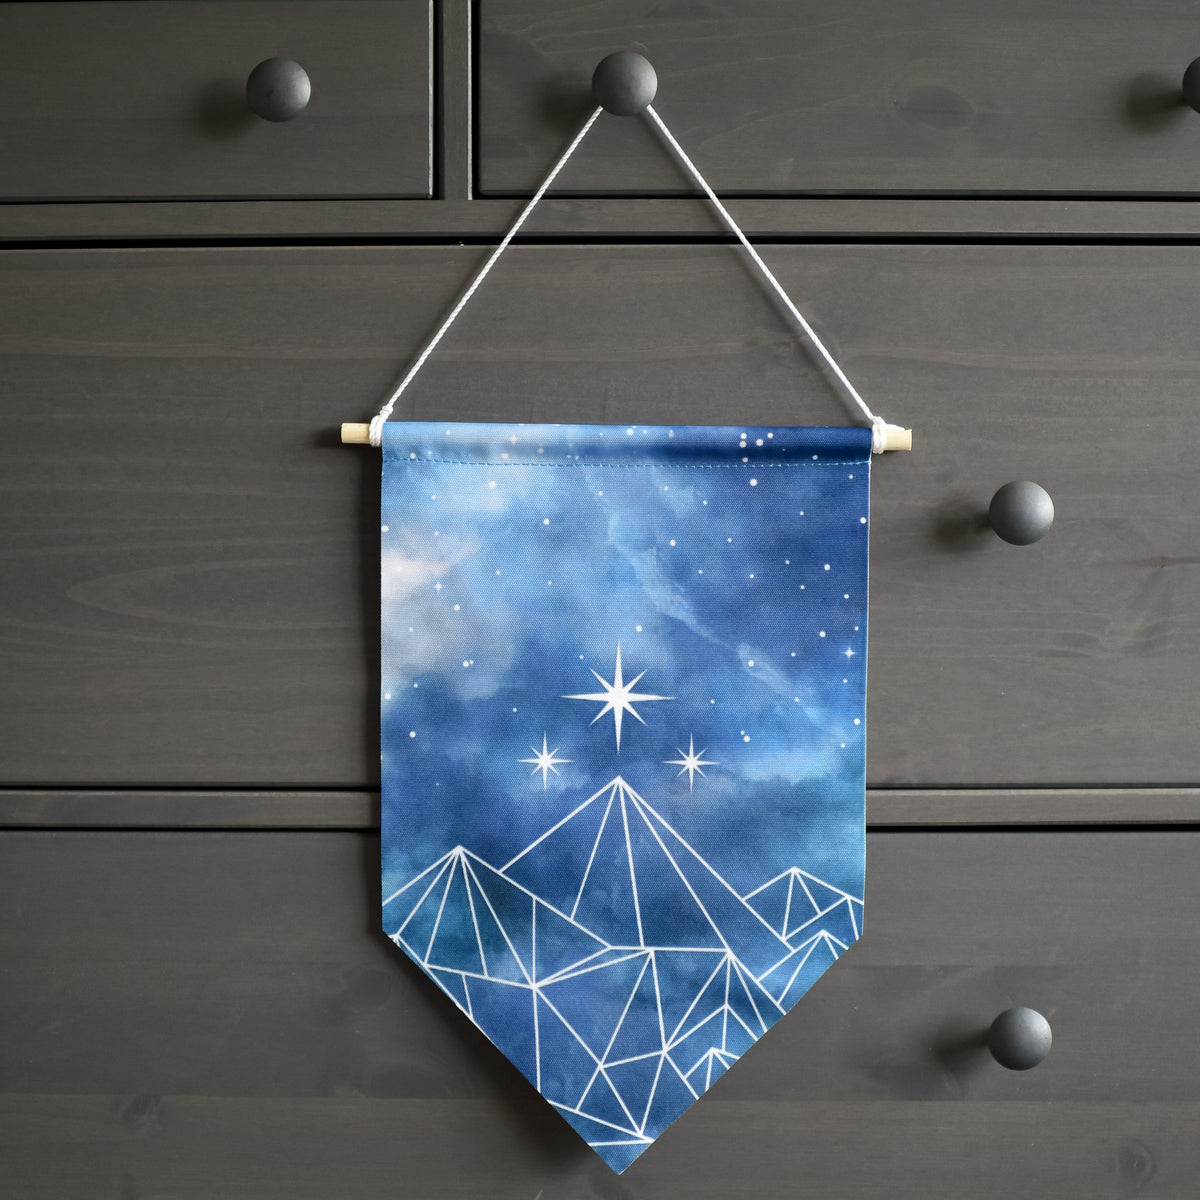 ACOTAR Velaris Pin Banner hanging with wood dowel &amp; rope. Blue night sky fabric with mountains of geometric white lines.